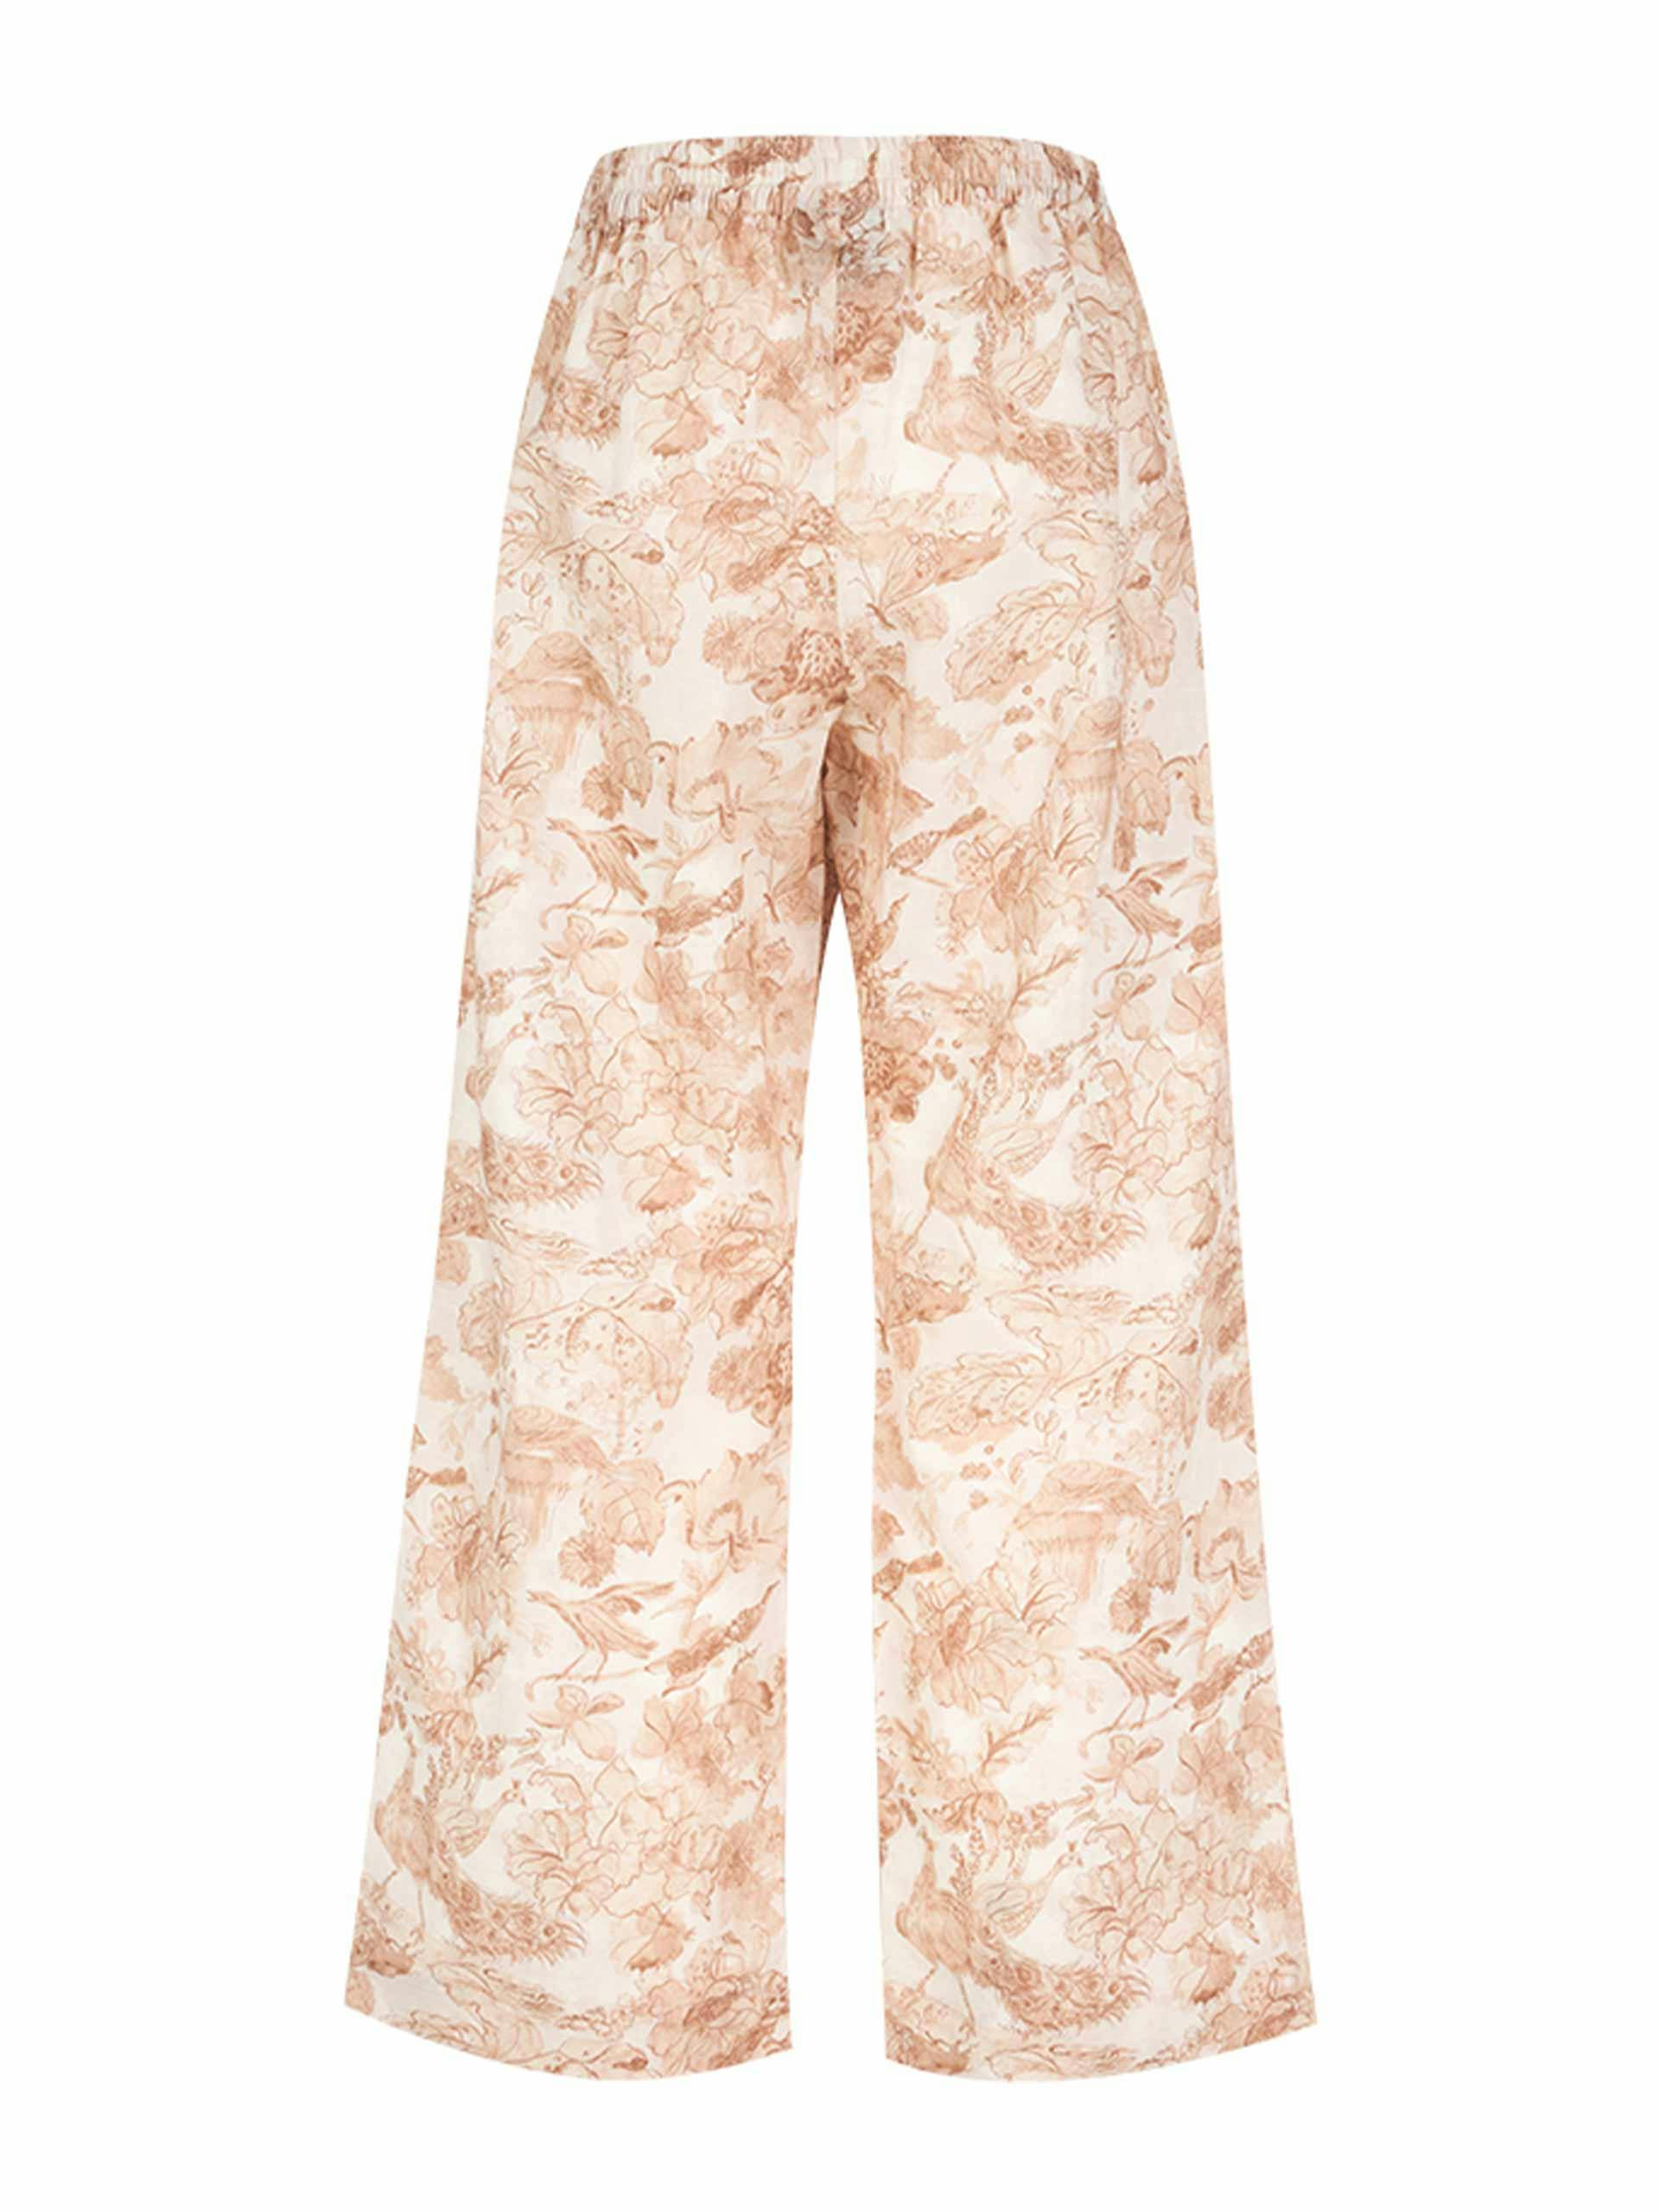 Pink and white cotton-linen zoe pyjama trousers